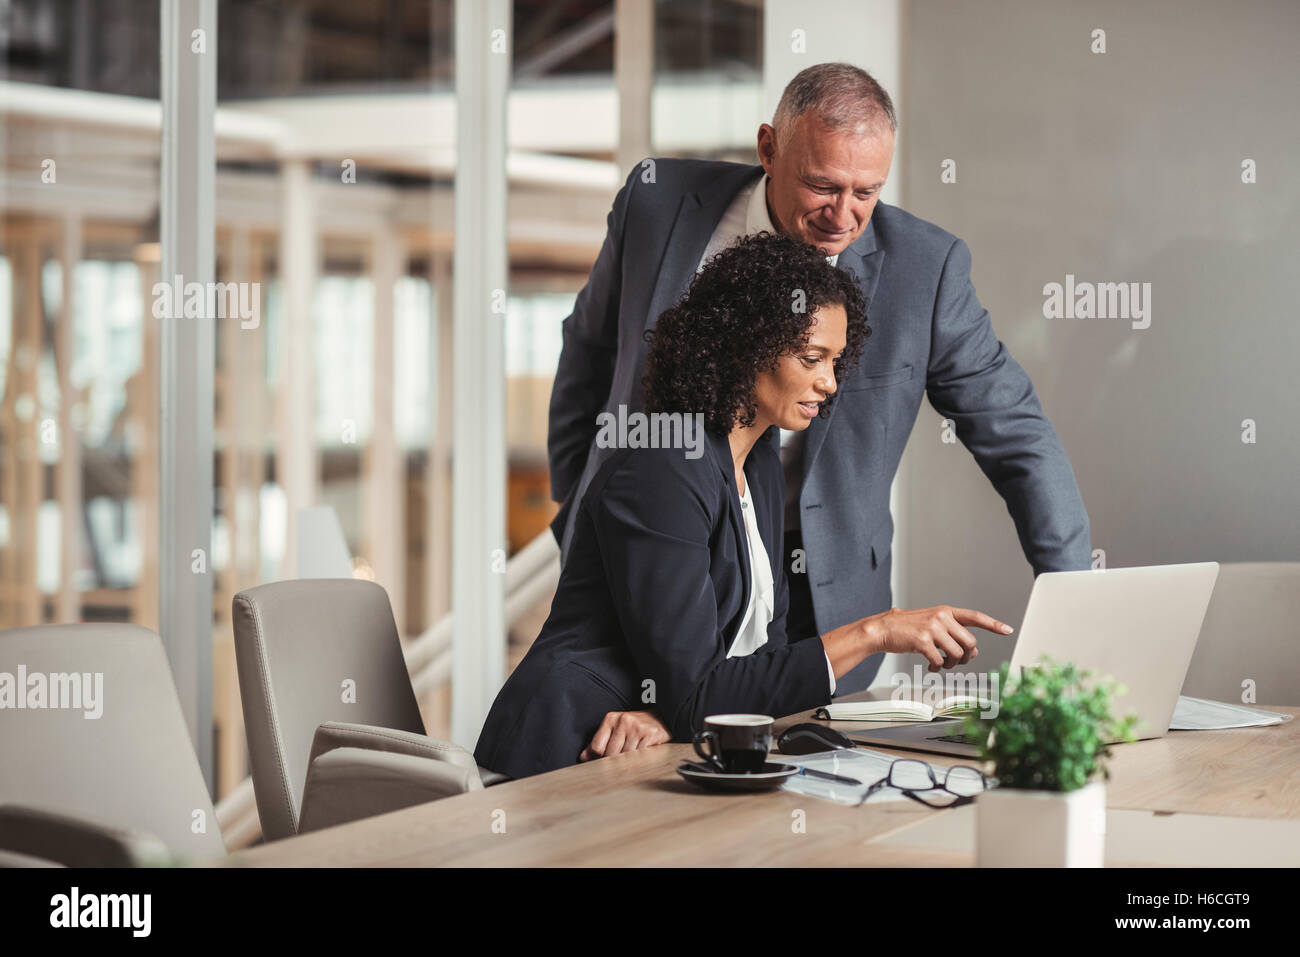 Discussing online business options Stock Photo